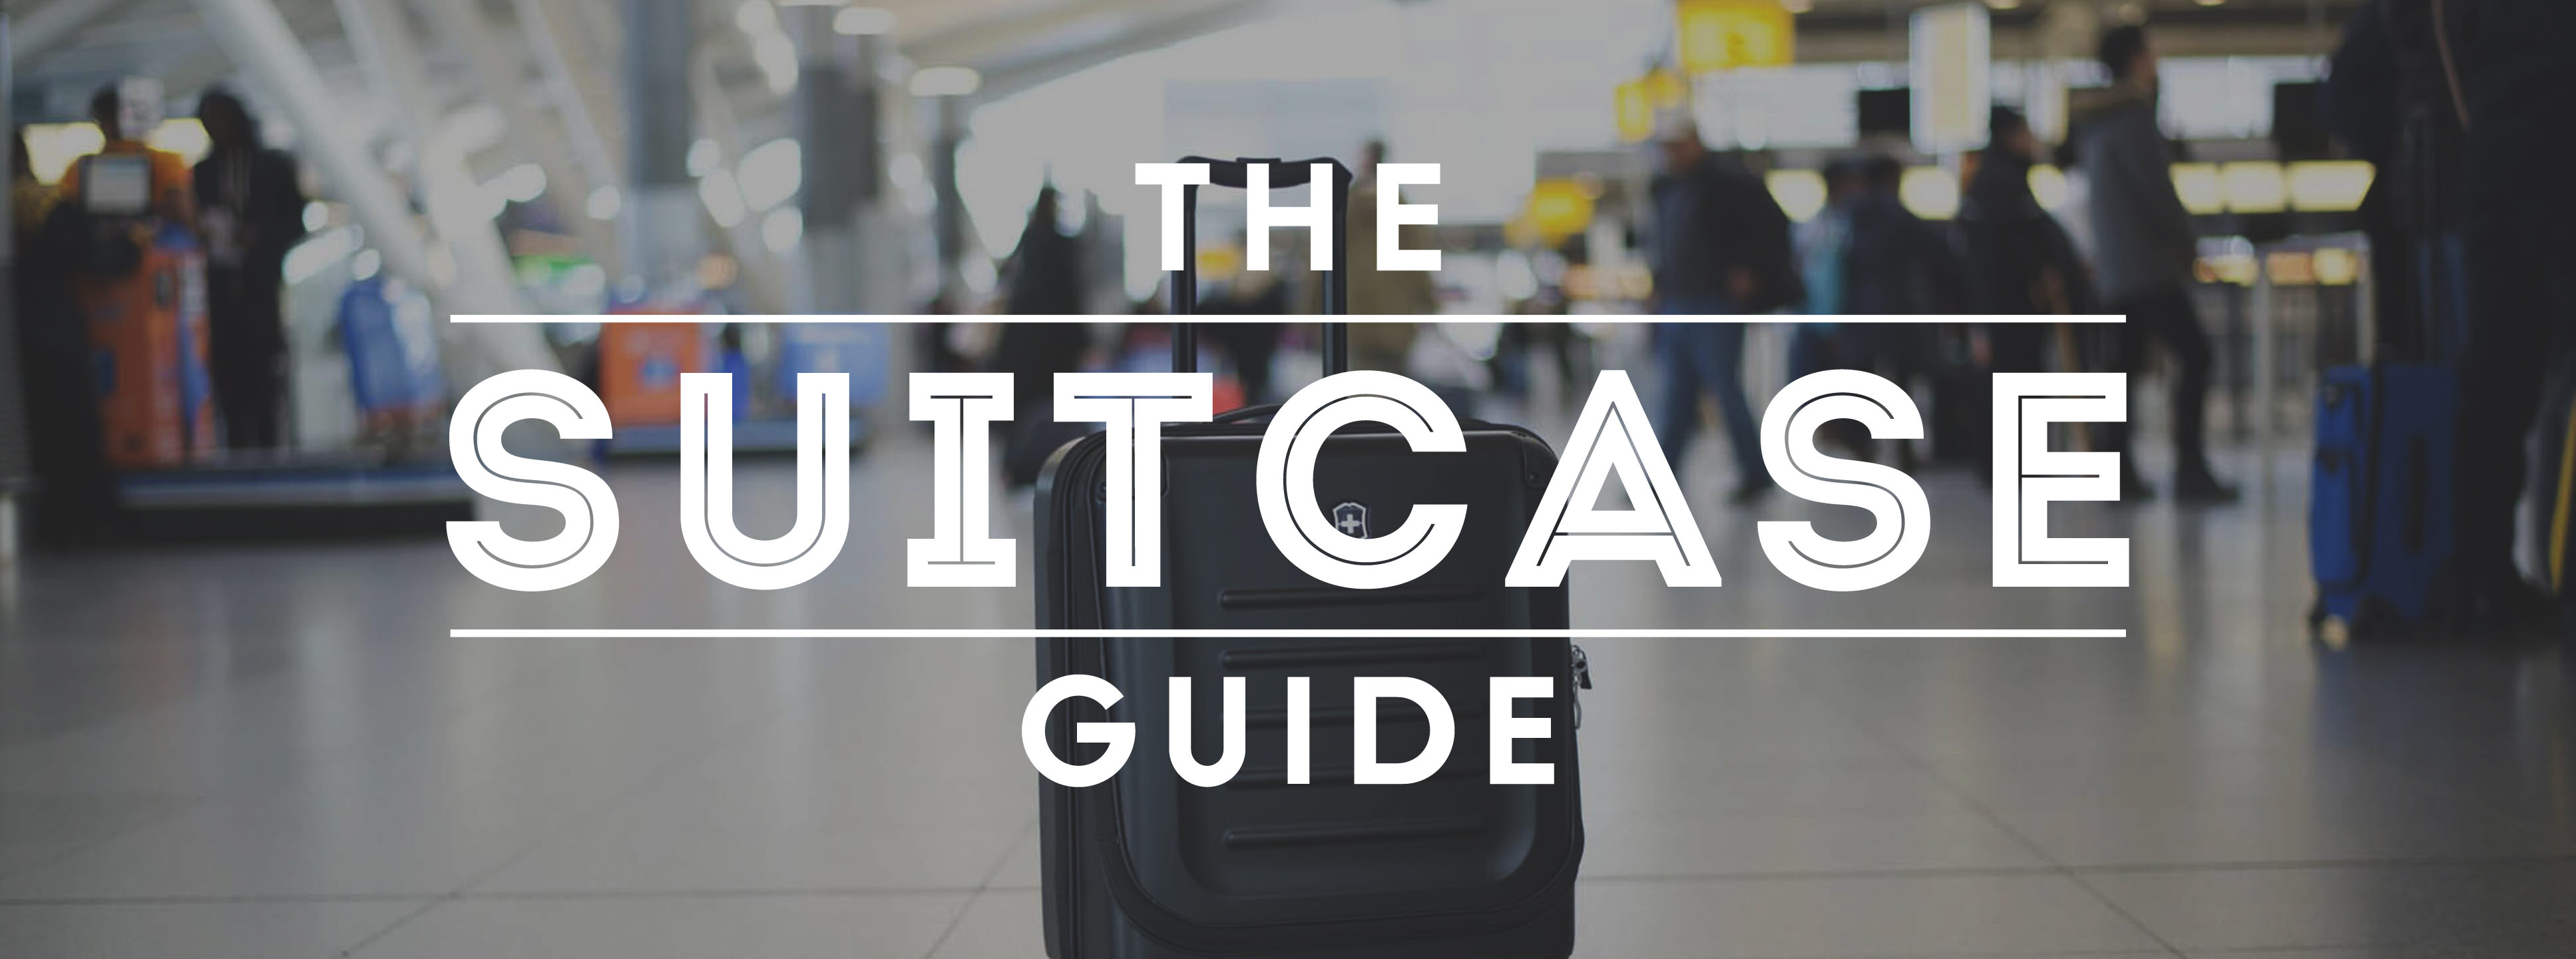 The Suitcase Guide 1